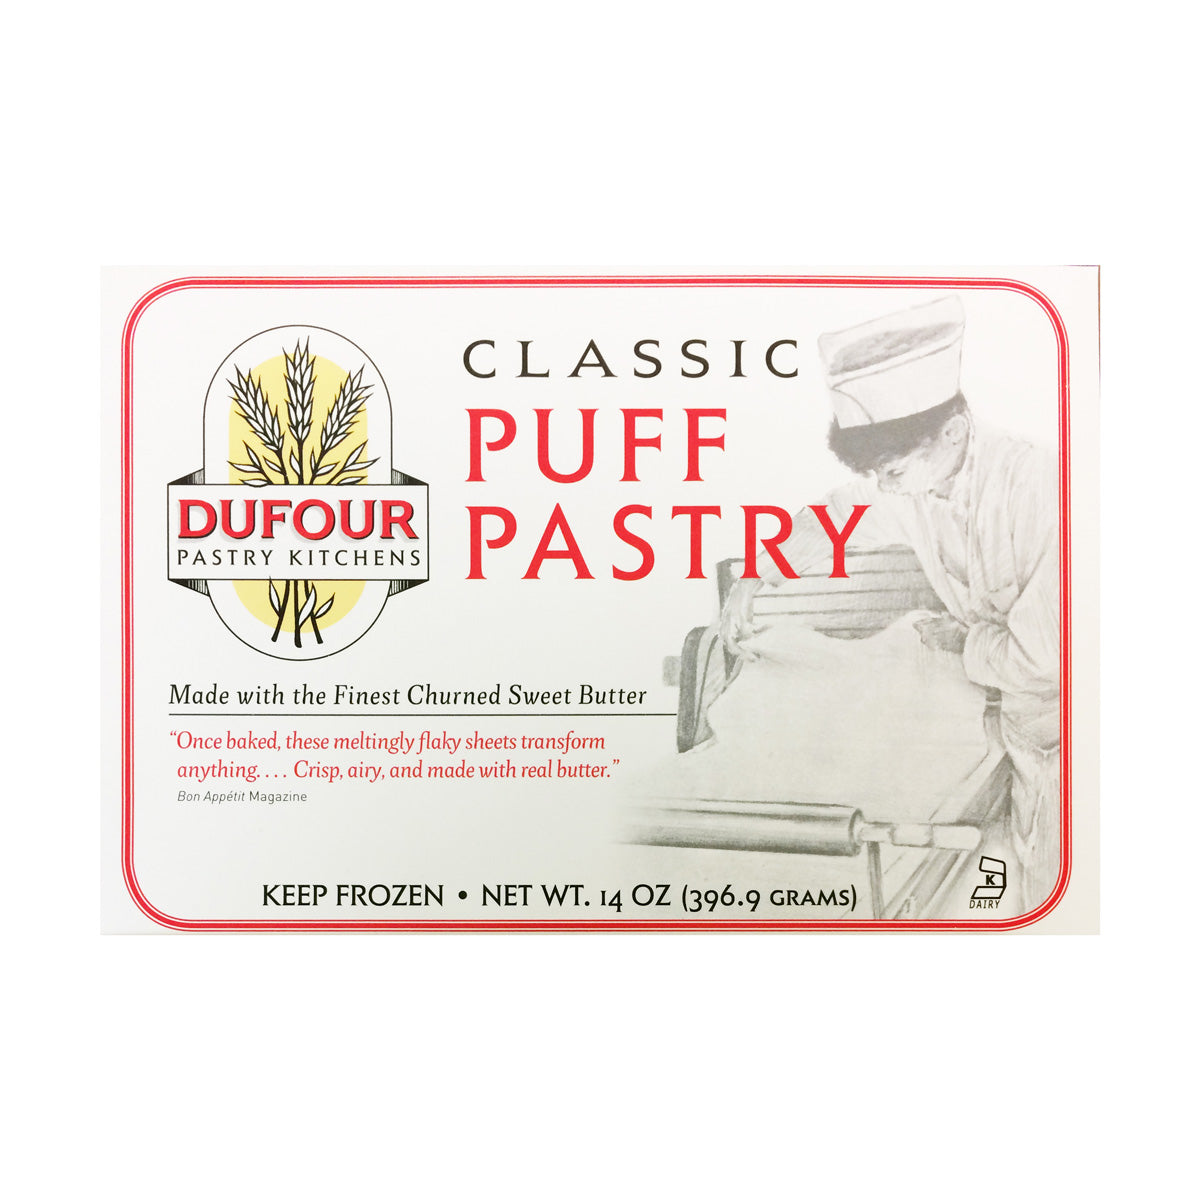 Dufour Pastry Kitchens Puff Pastry 14 OZ